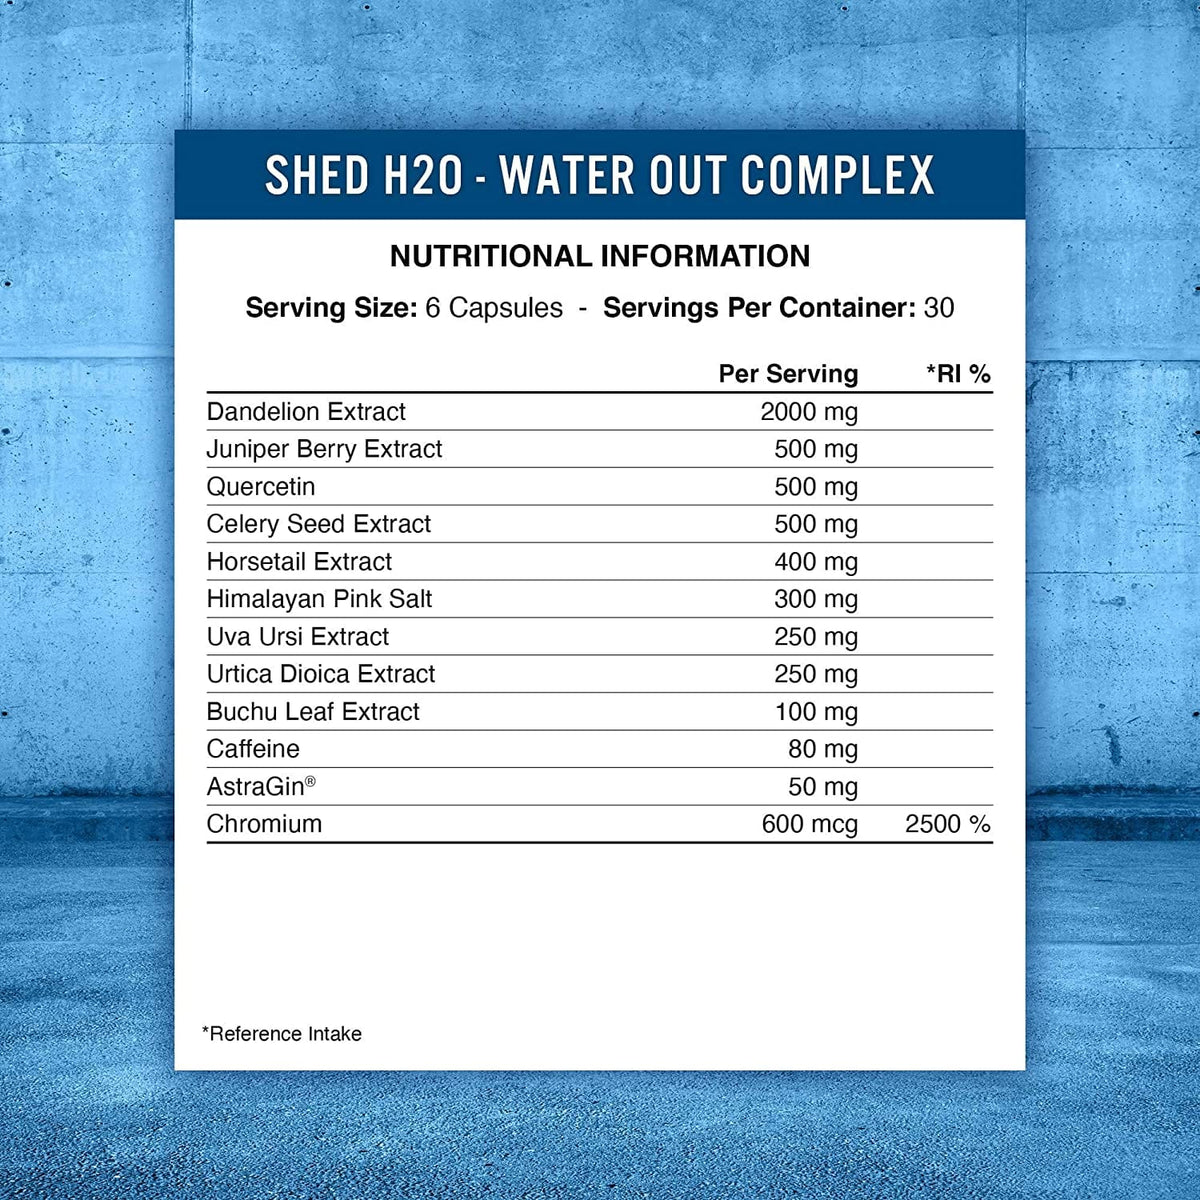 Shed H20 - Water Out Complex